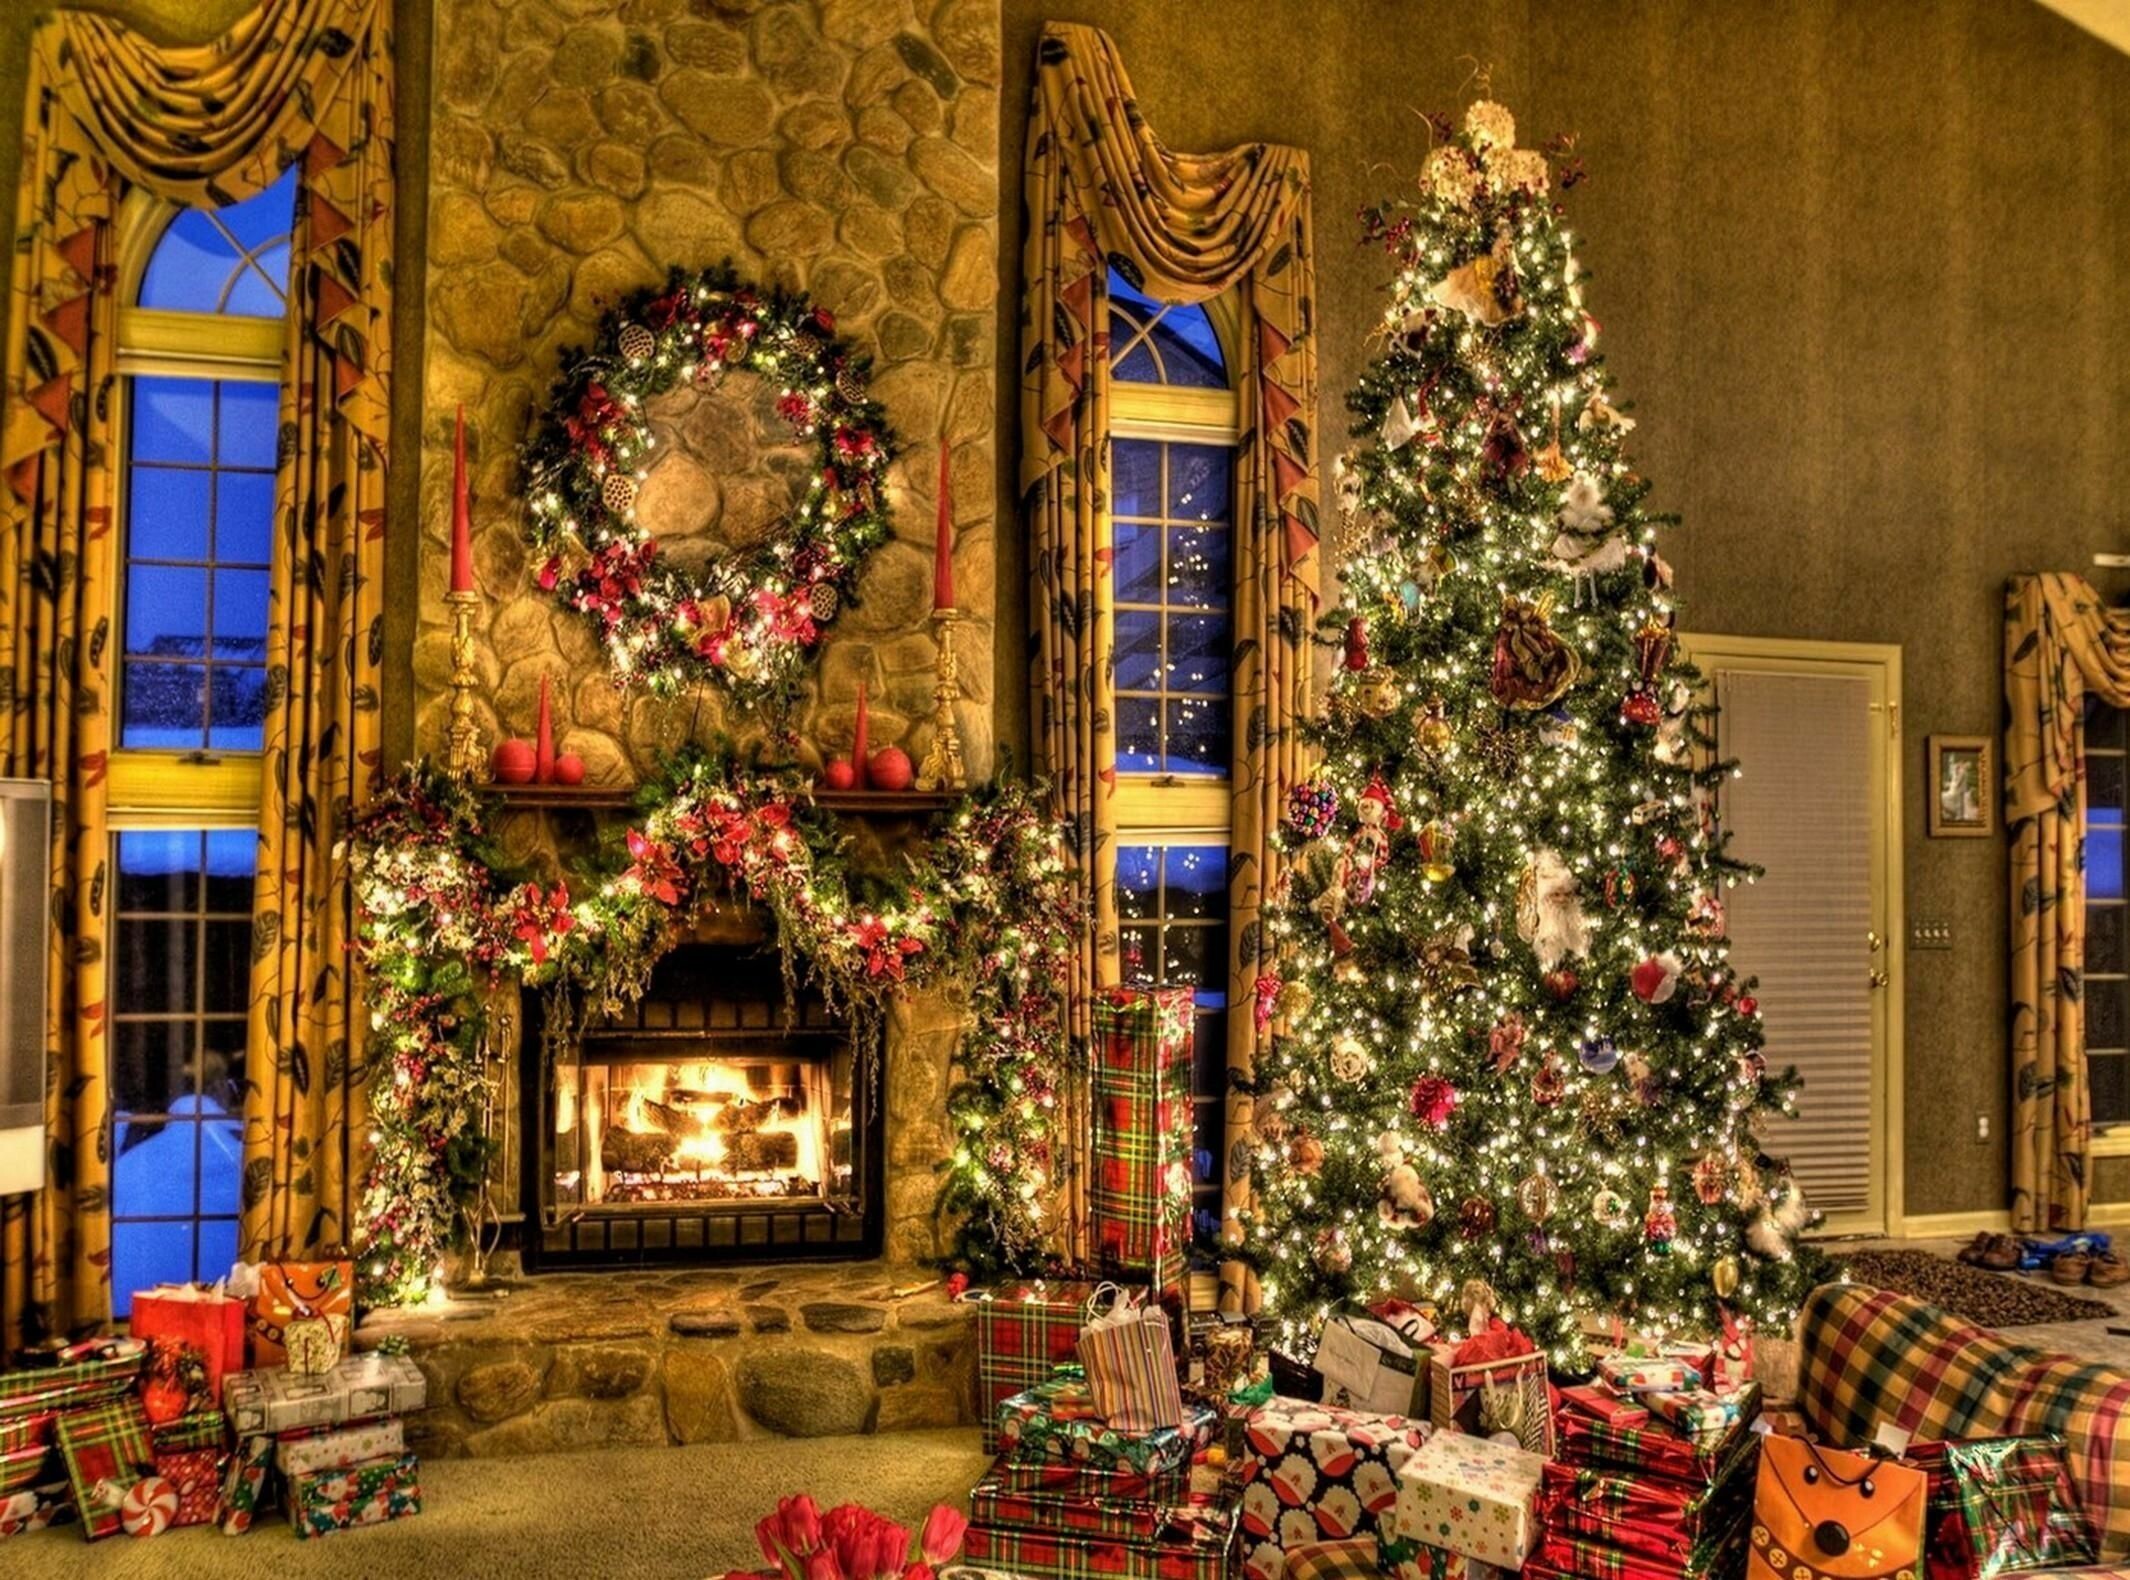 Christmas Fireplace: Chimney, Ornament, Gifts, Family holiday. 2130x1580 HD Wallpaper.